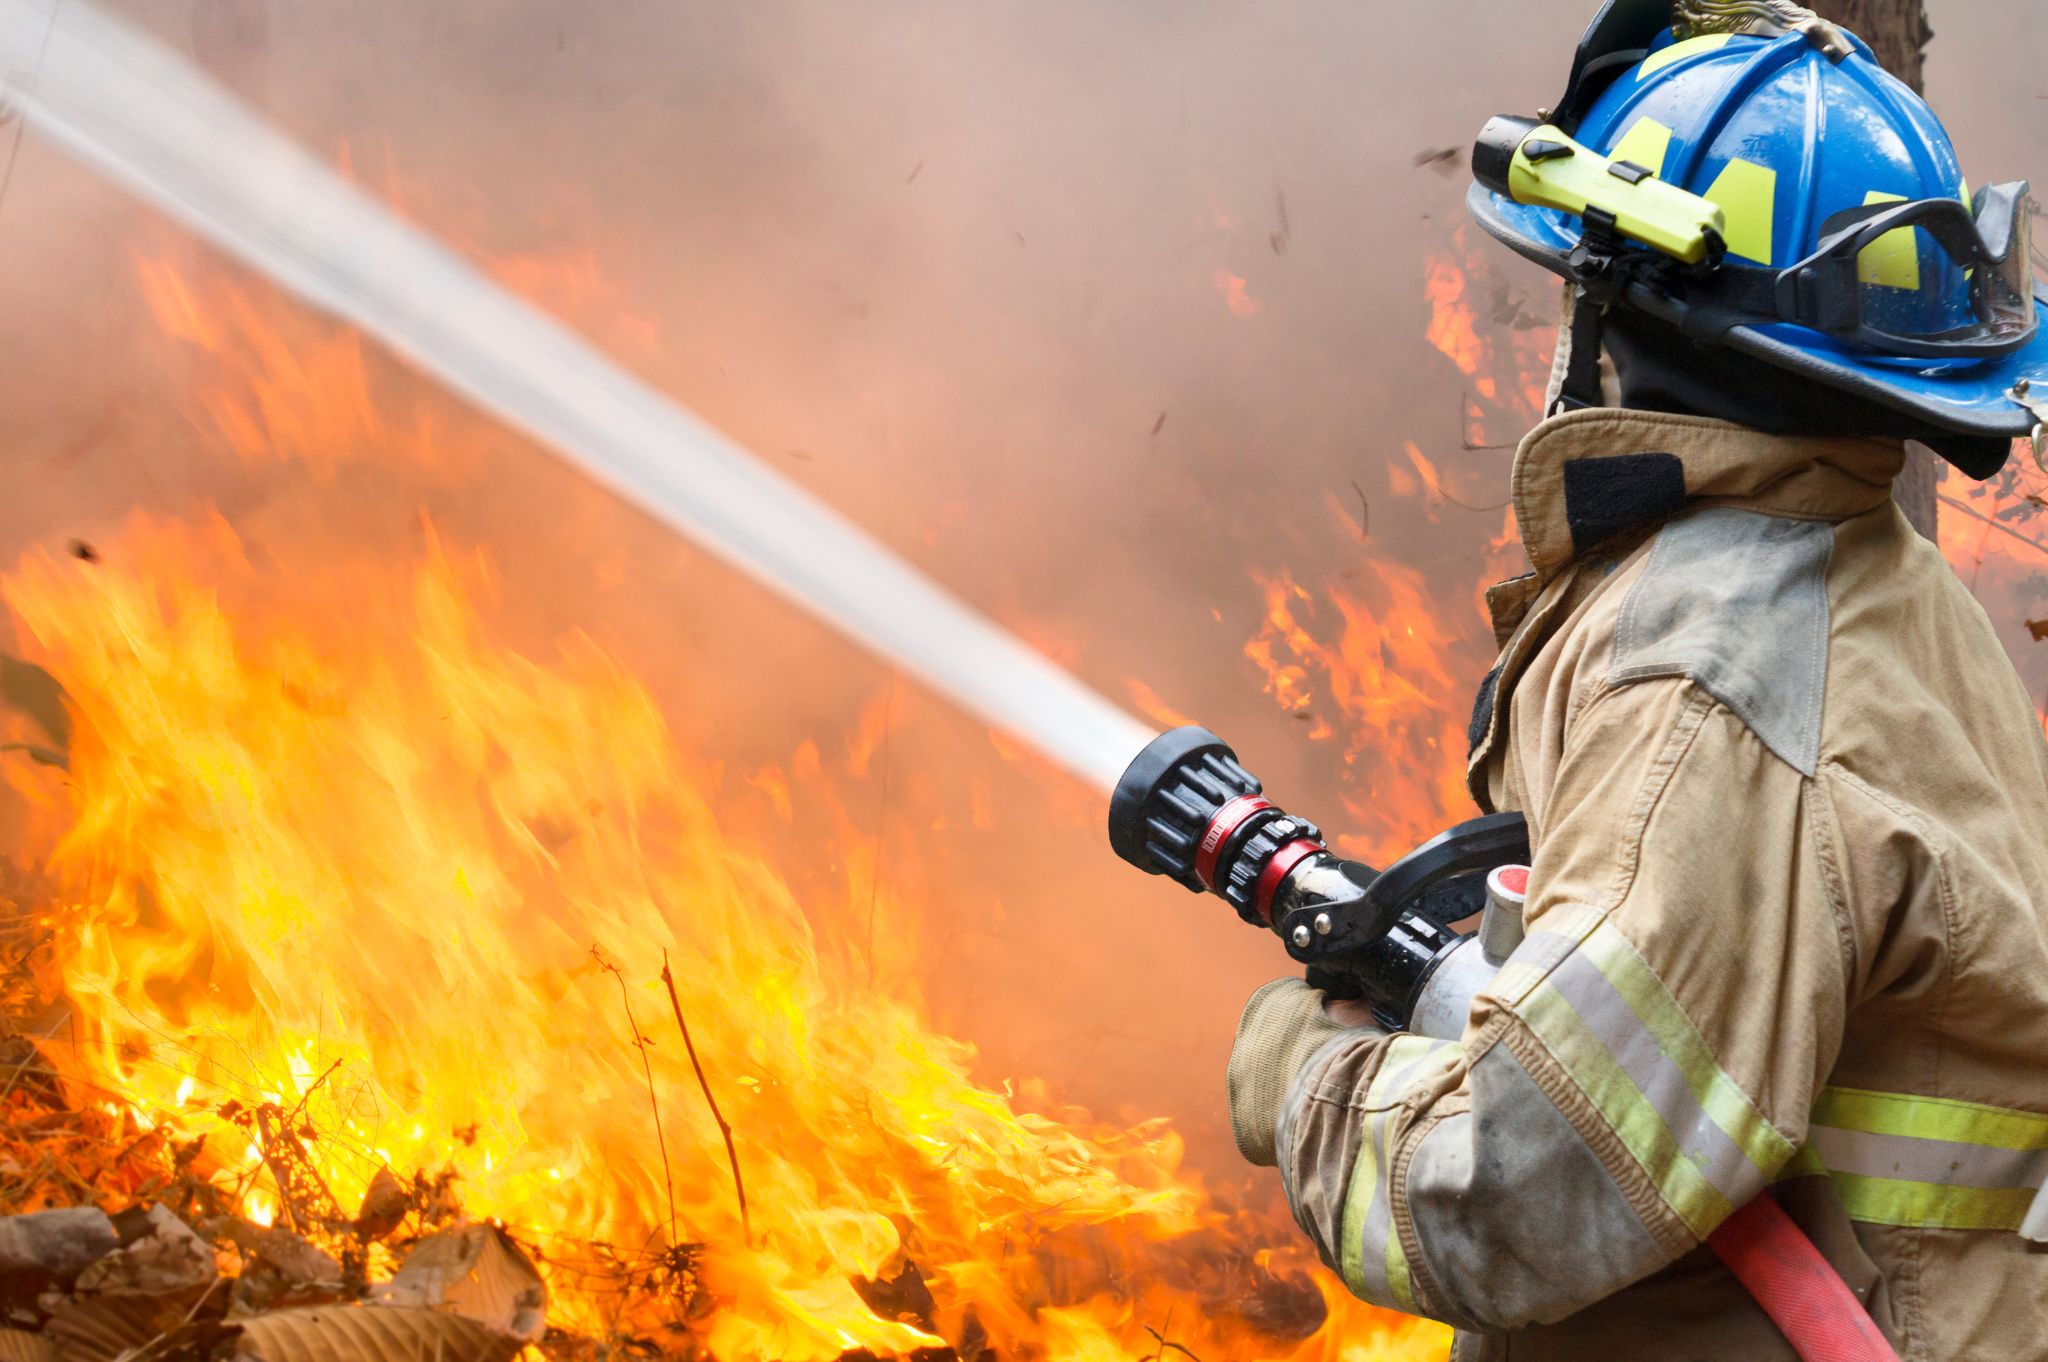 A firefighter with a hose in his hands